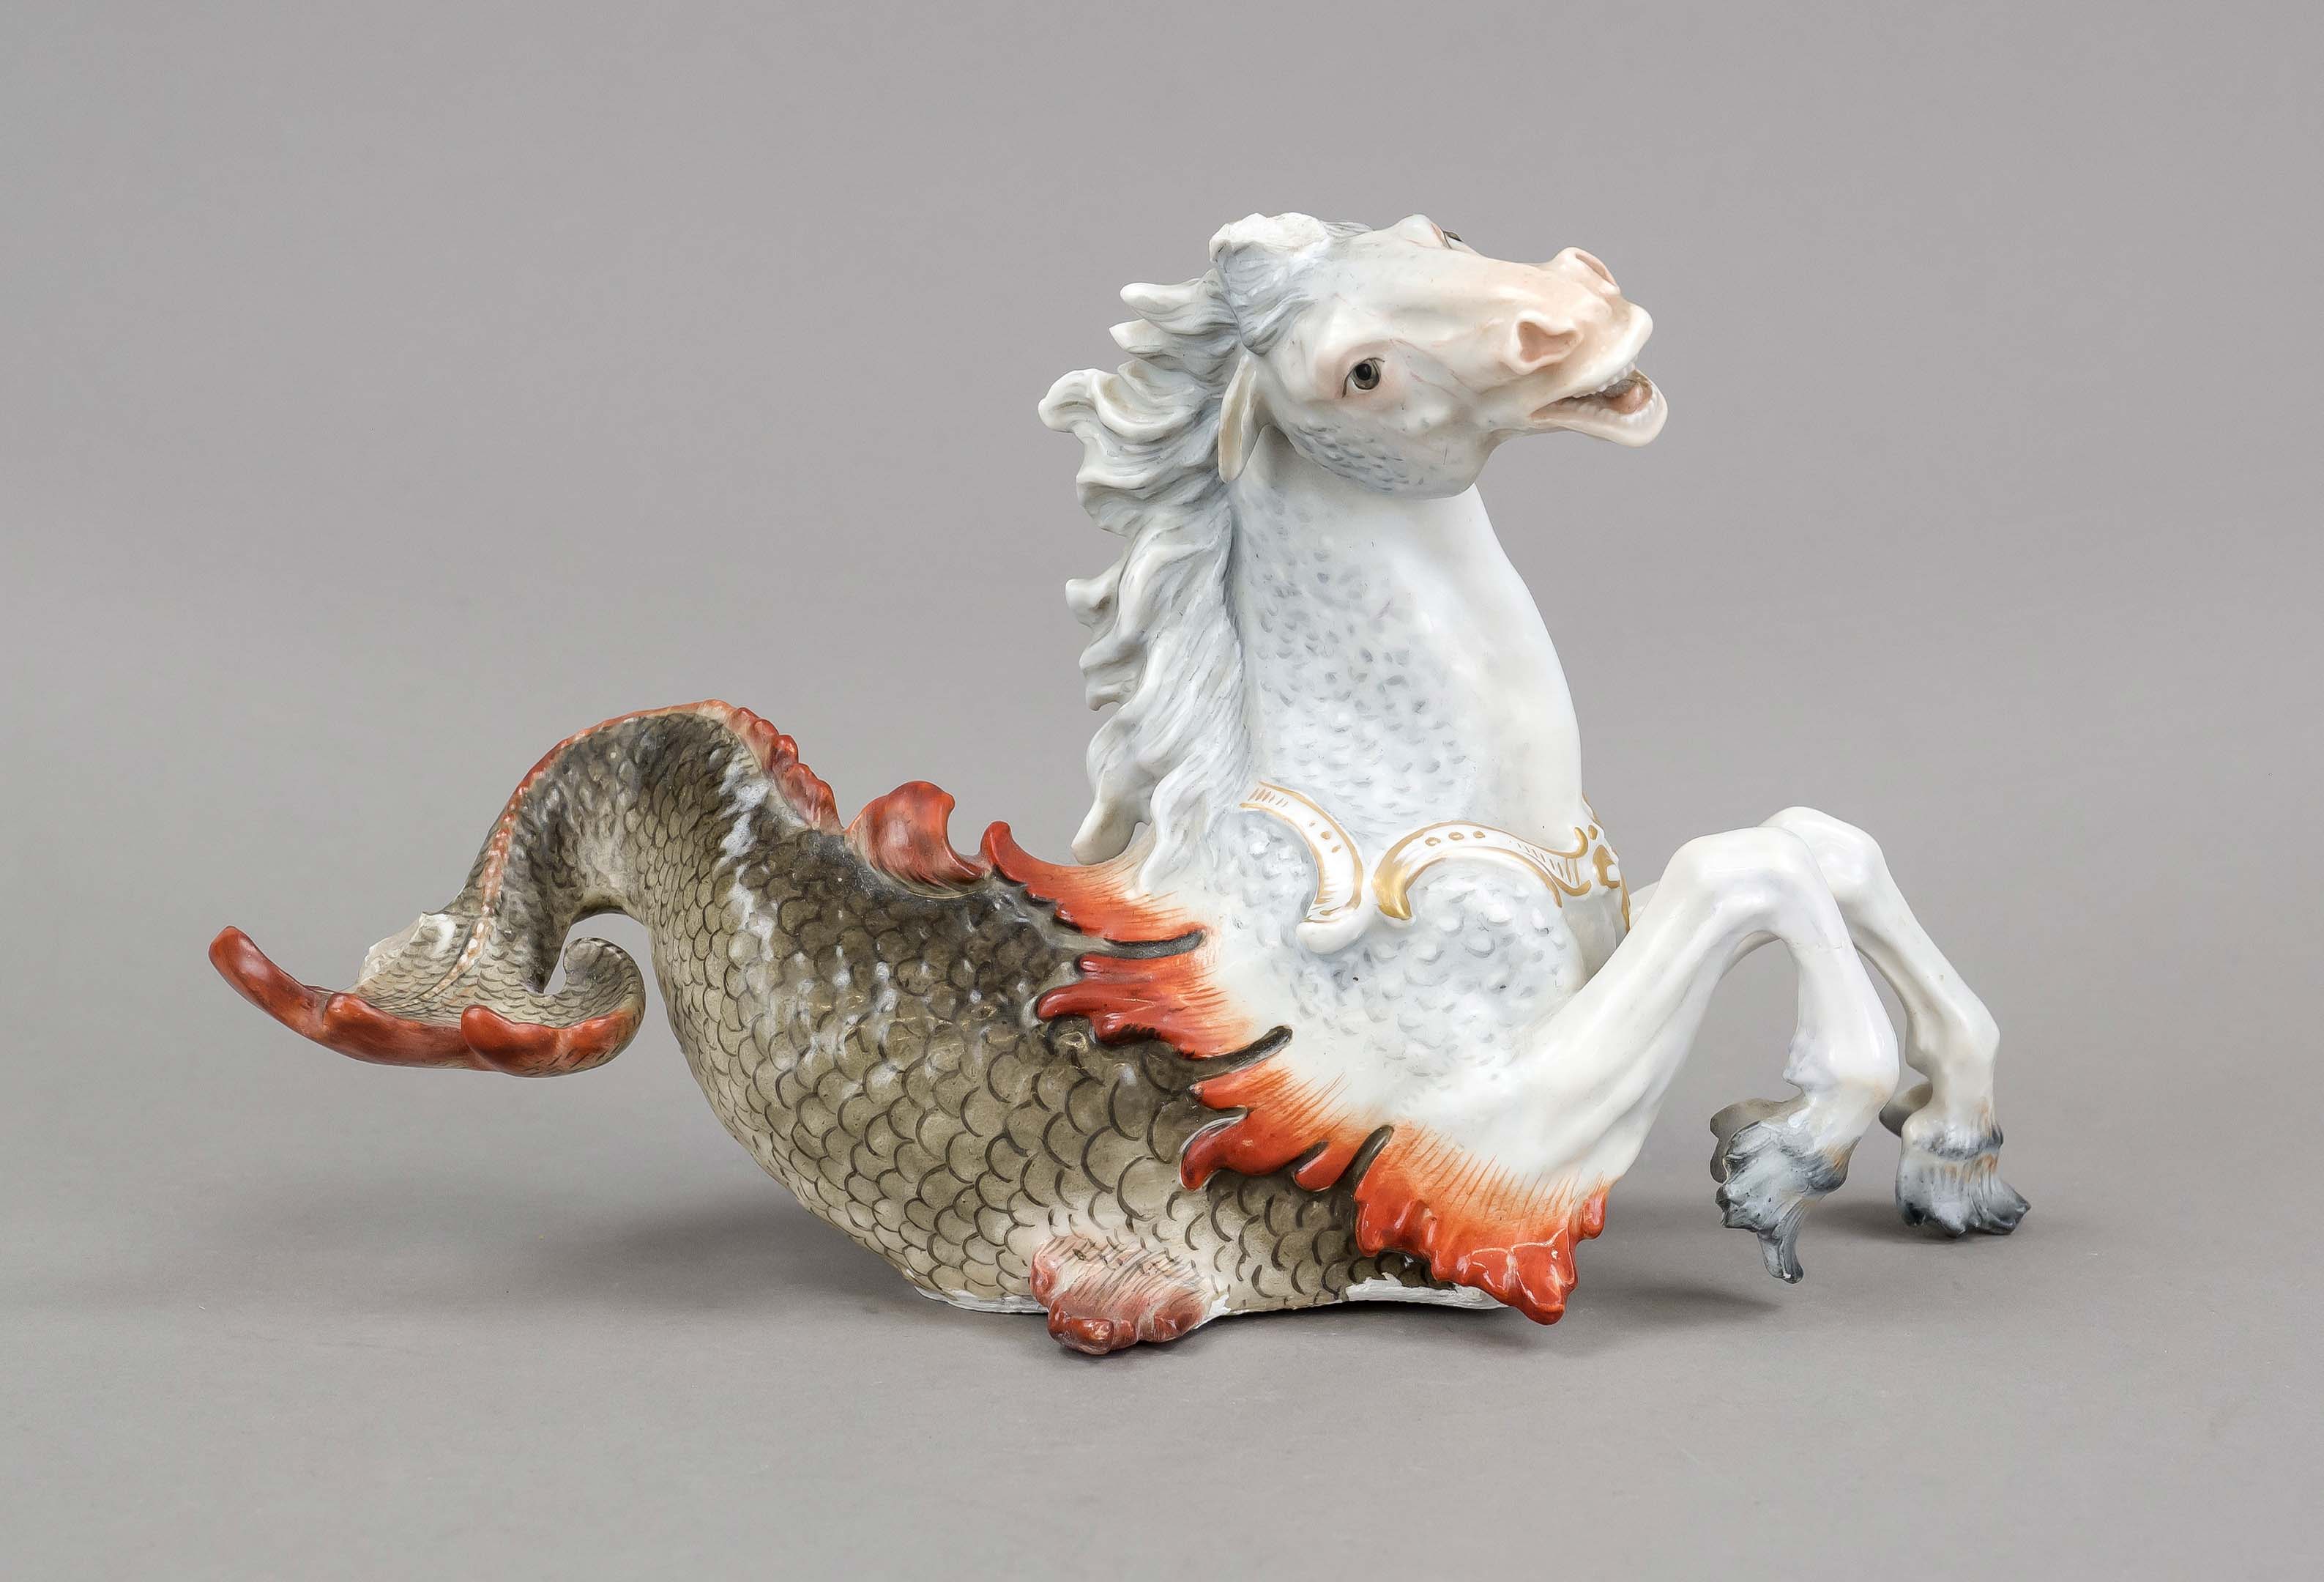 Hippocamp, Meissen, unmarked, probably from a group of figures with Neptune and chariot, designed by